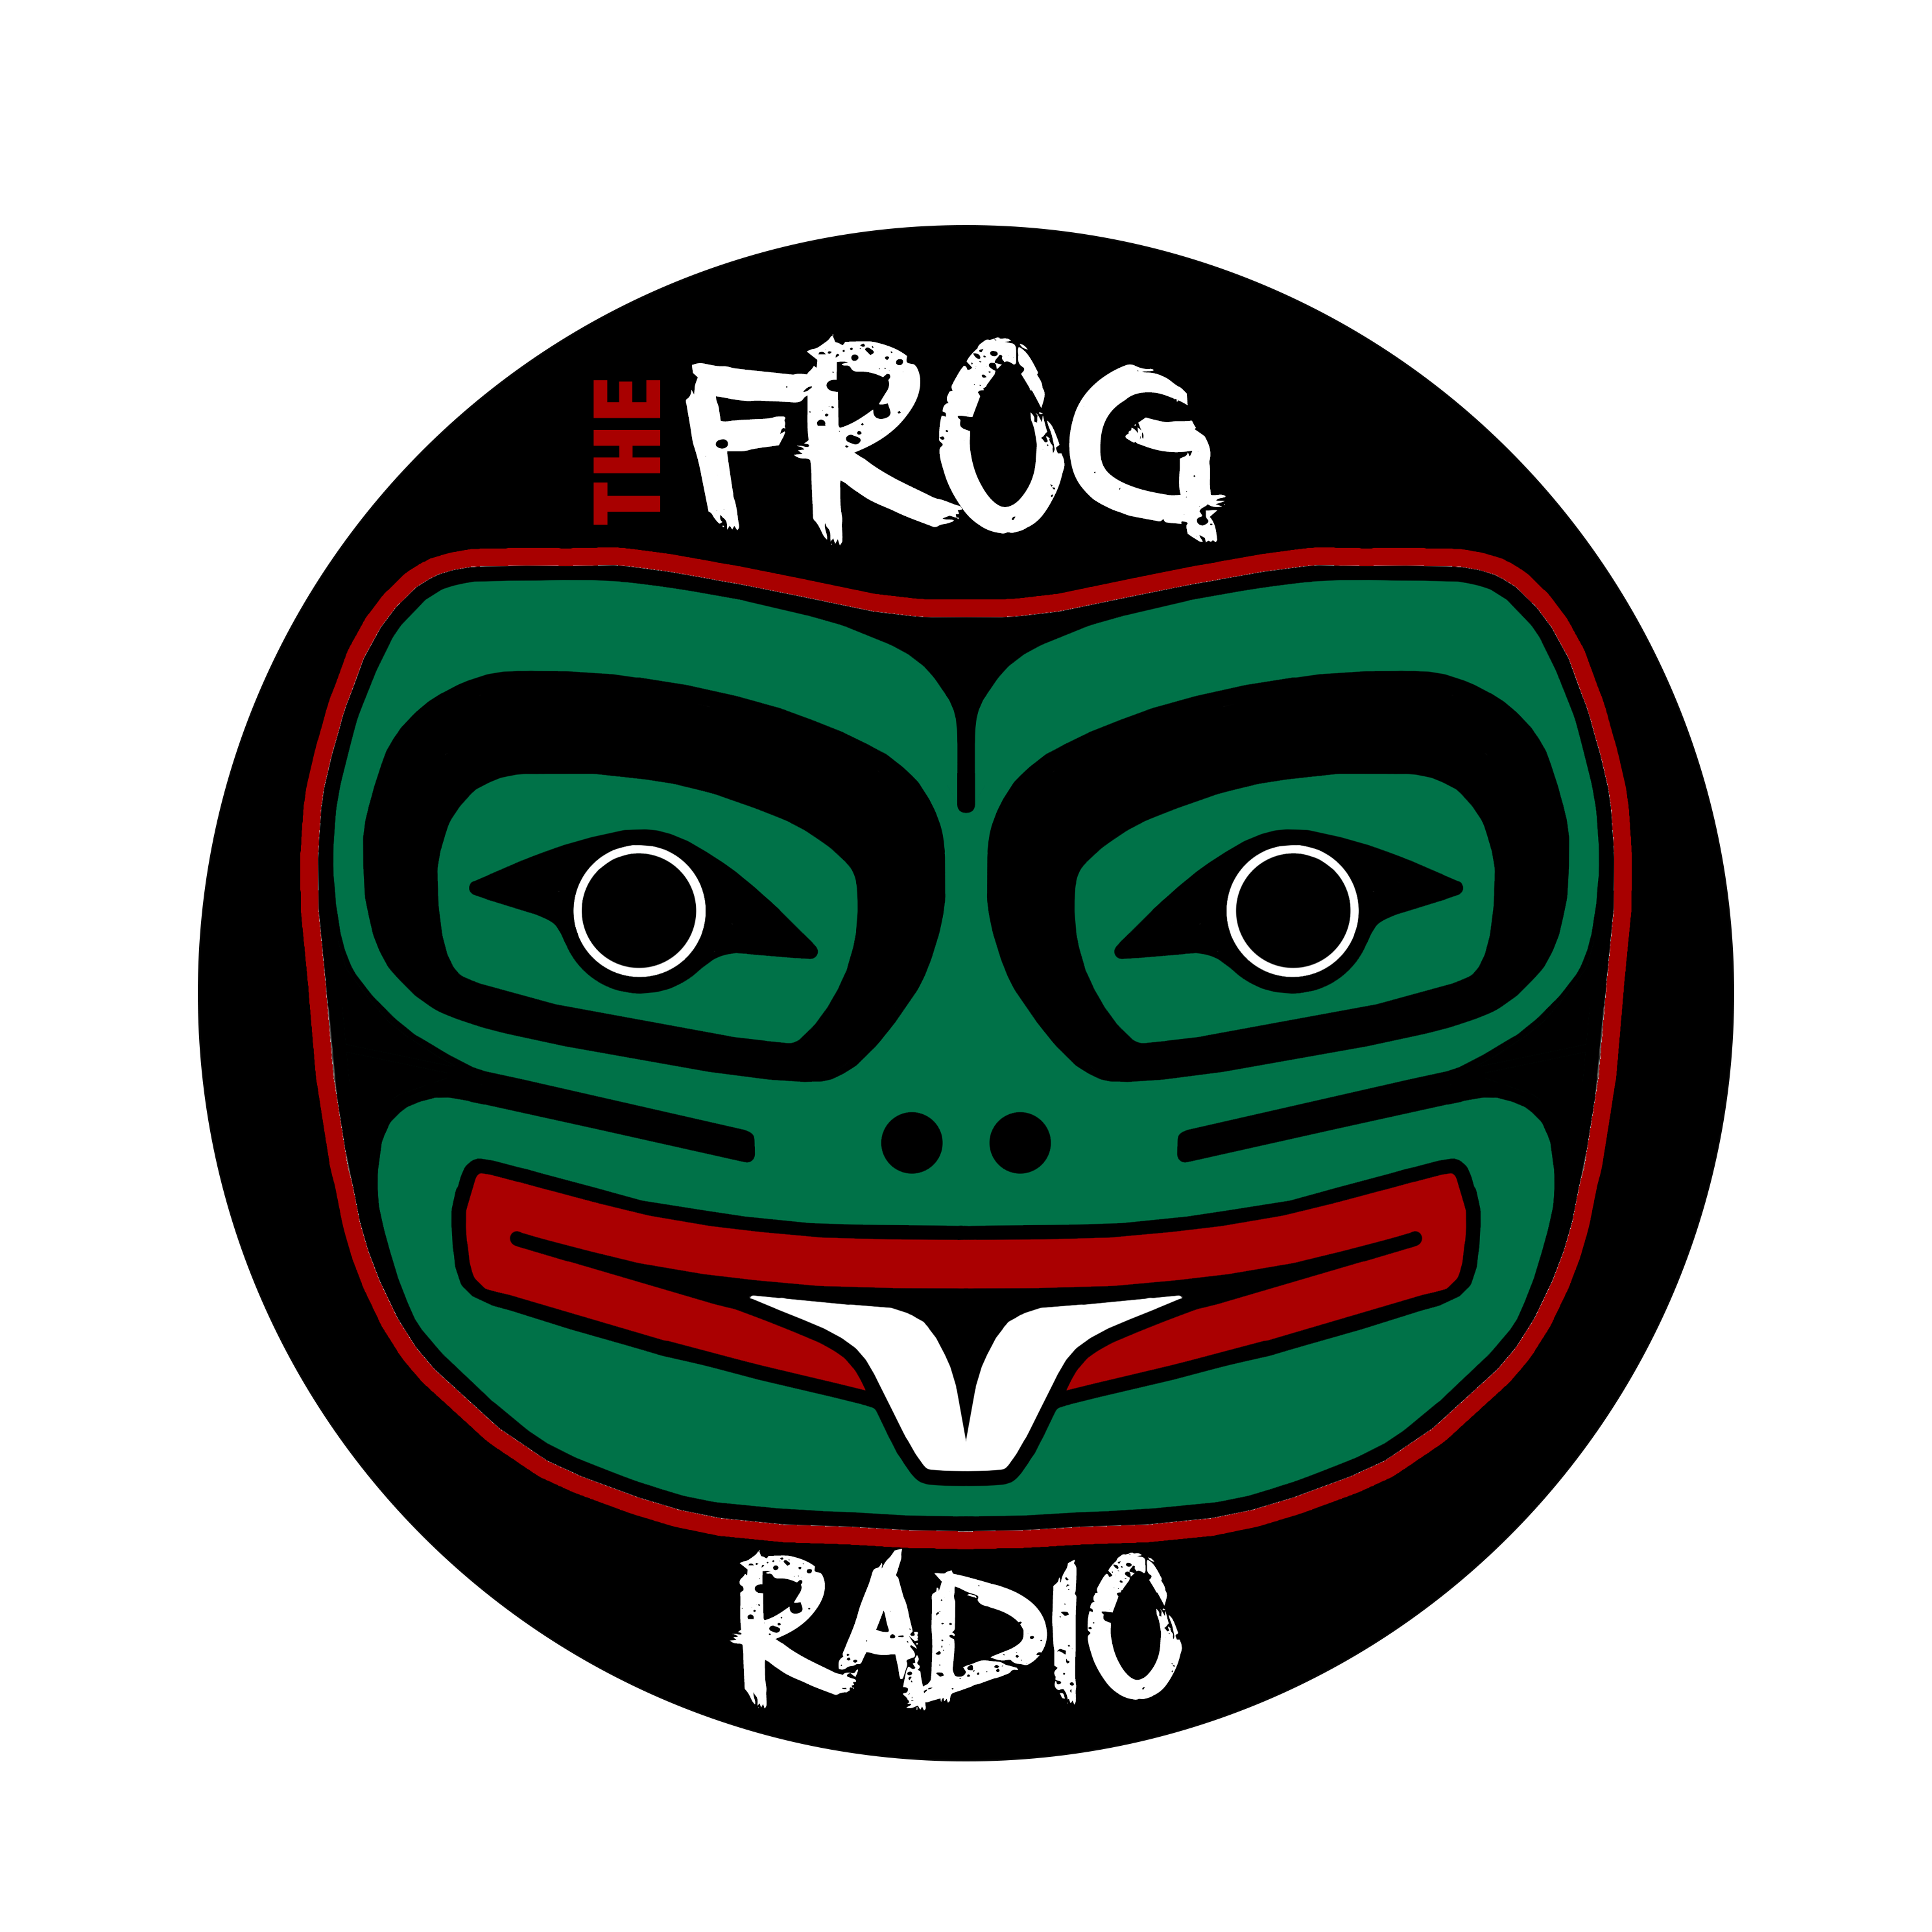 Art for Hop on the by frog! The Frog Radio